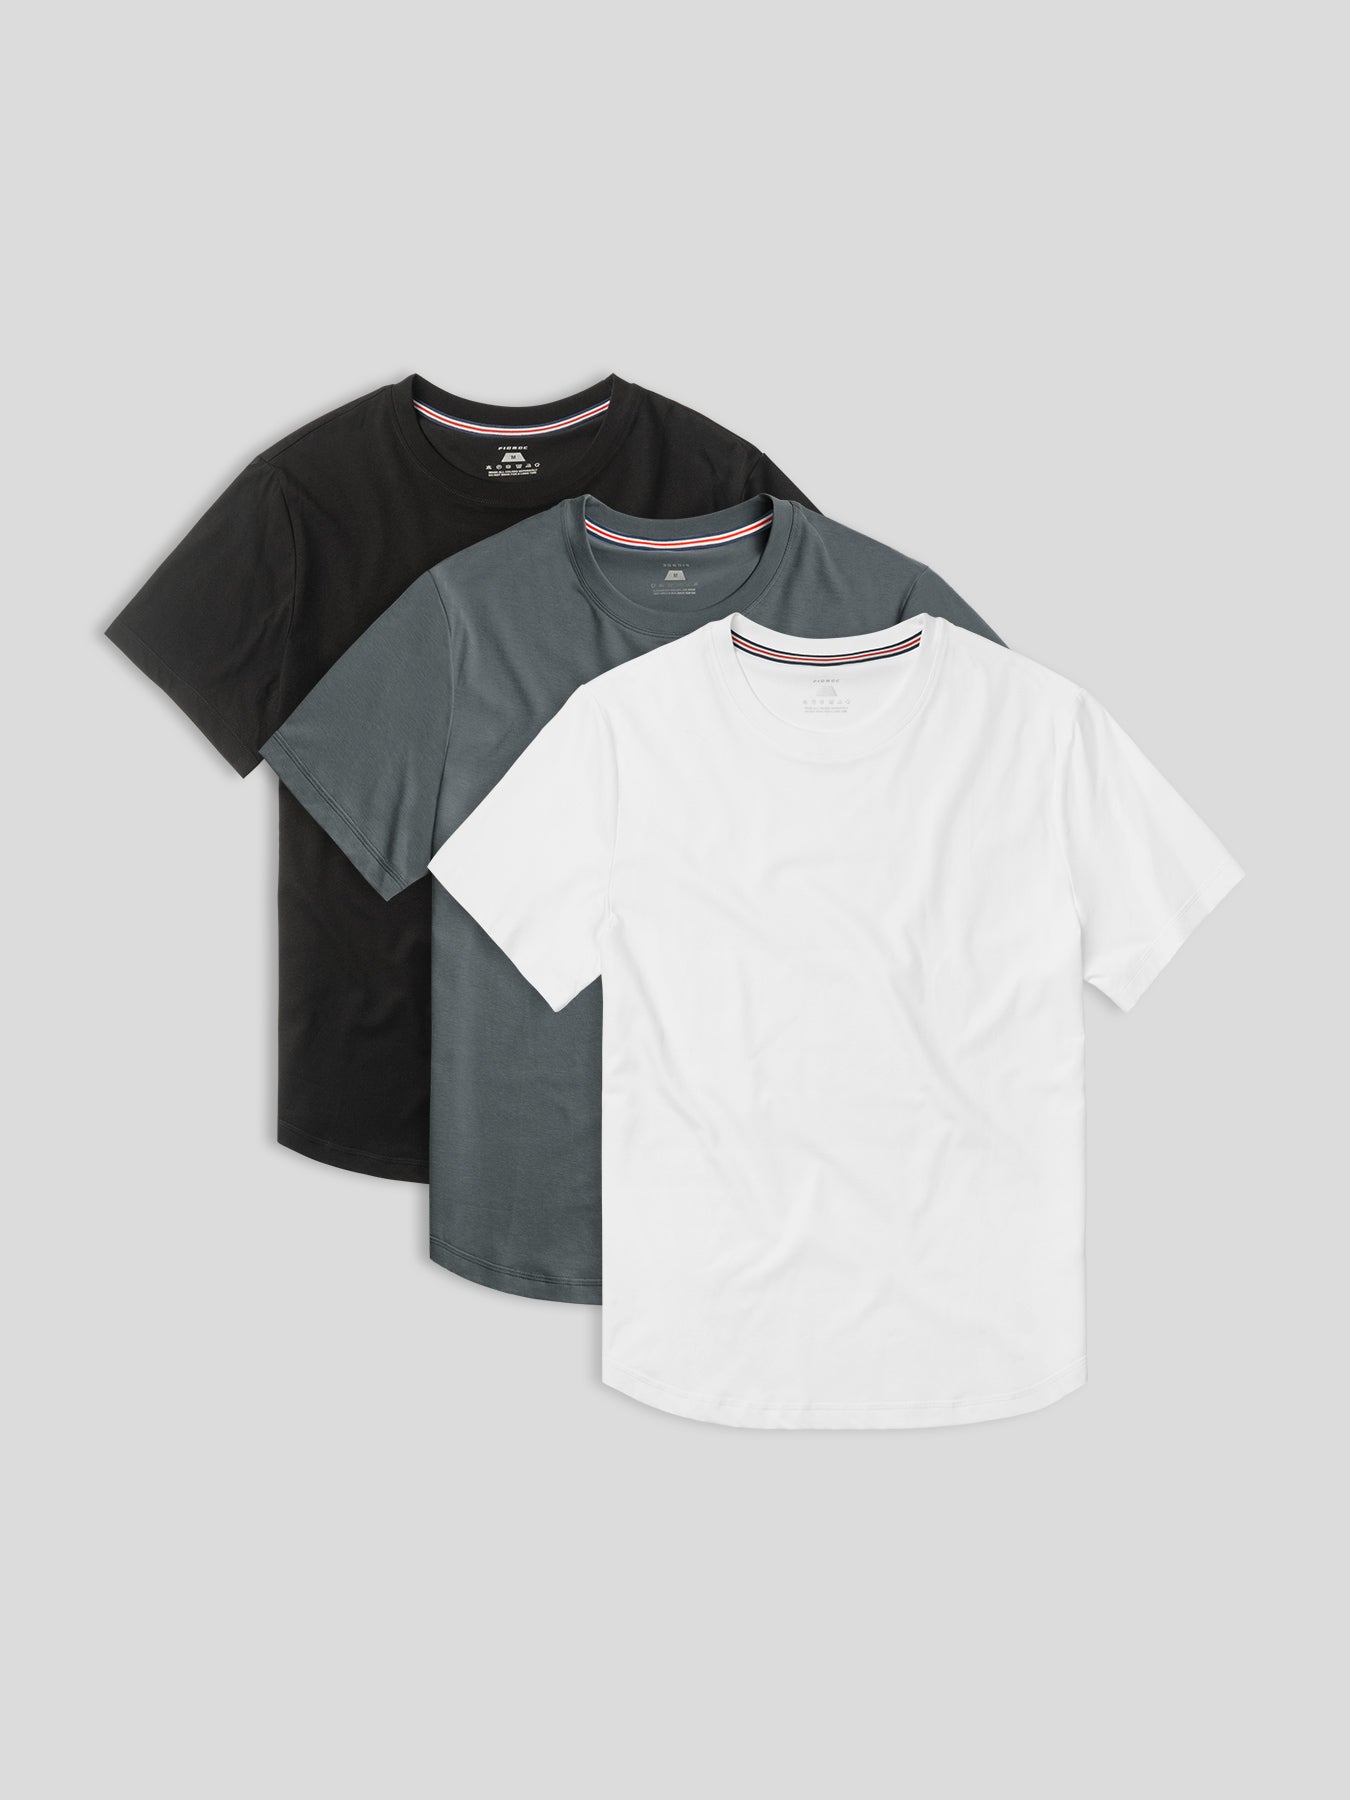 StayCool 2.0 Classic Fit Tee Multicolor 3-Pack